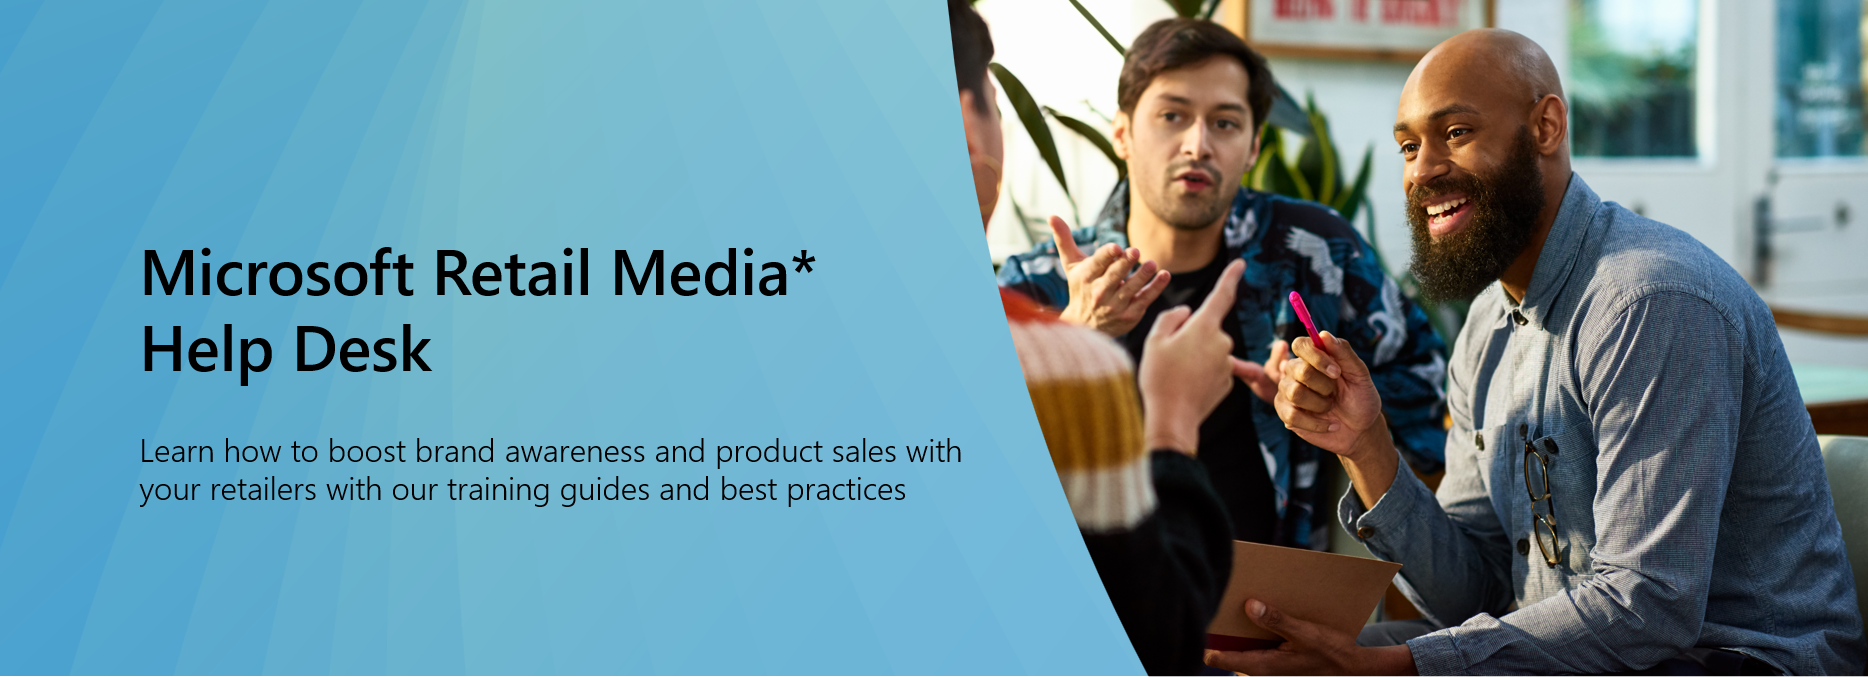 microsoft retail media help desk; learn how to boost brand awareness and product sales with your retailers with our training guides and best practices; three people talking and collaborating in a relaxed office enviornment